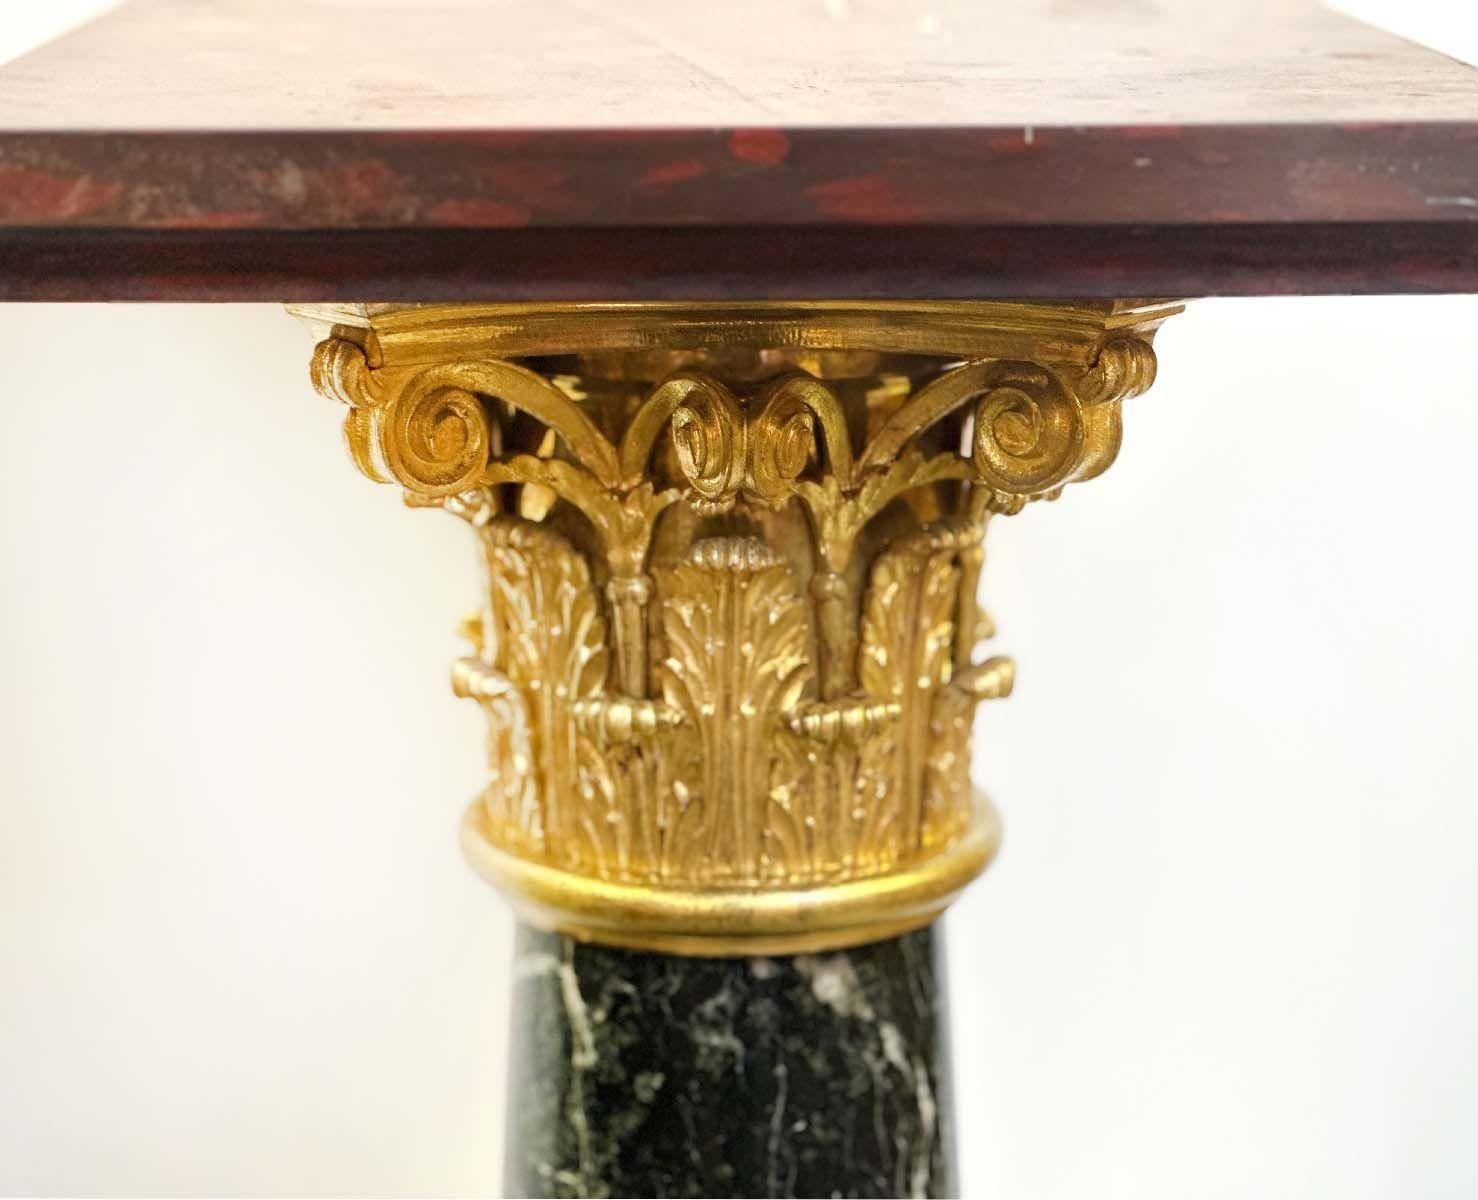 Pair of impressive pedestals made of fine quality green and red marble as well as great bronze details. Made in France, Early 19th Century. 
Dimensions:
46